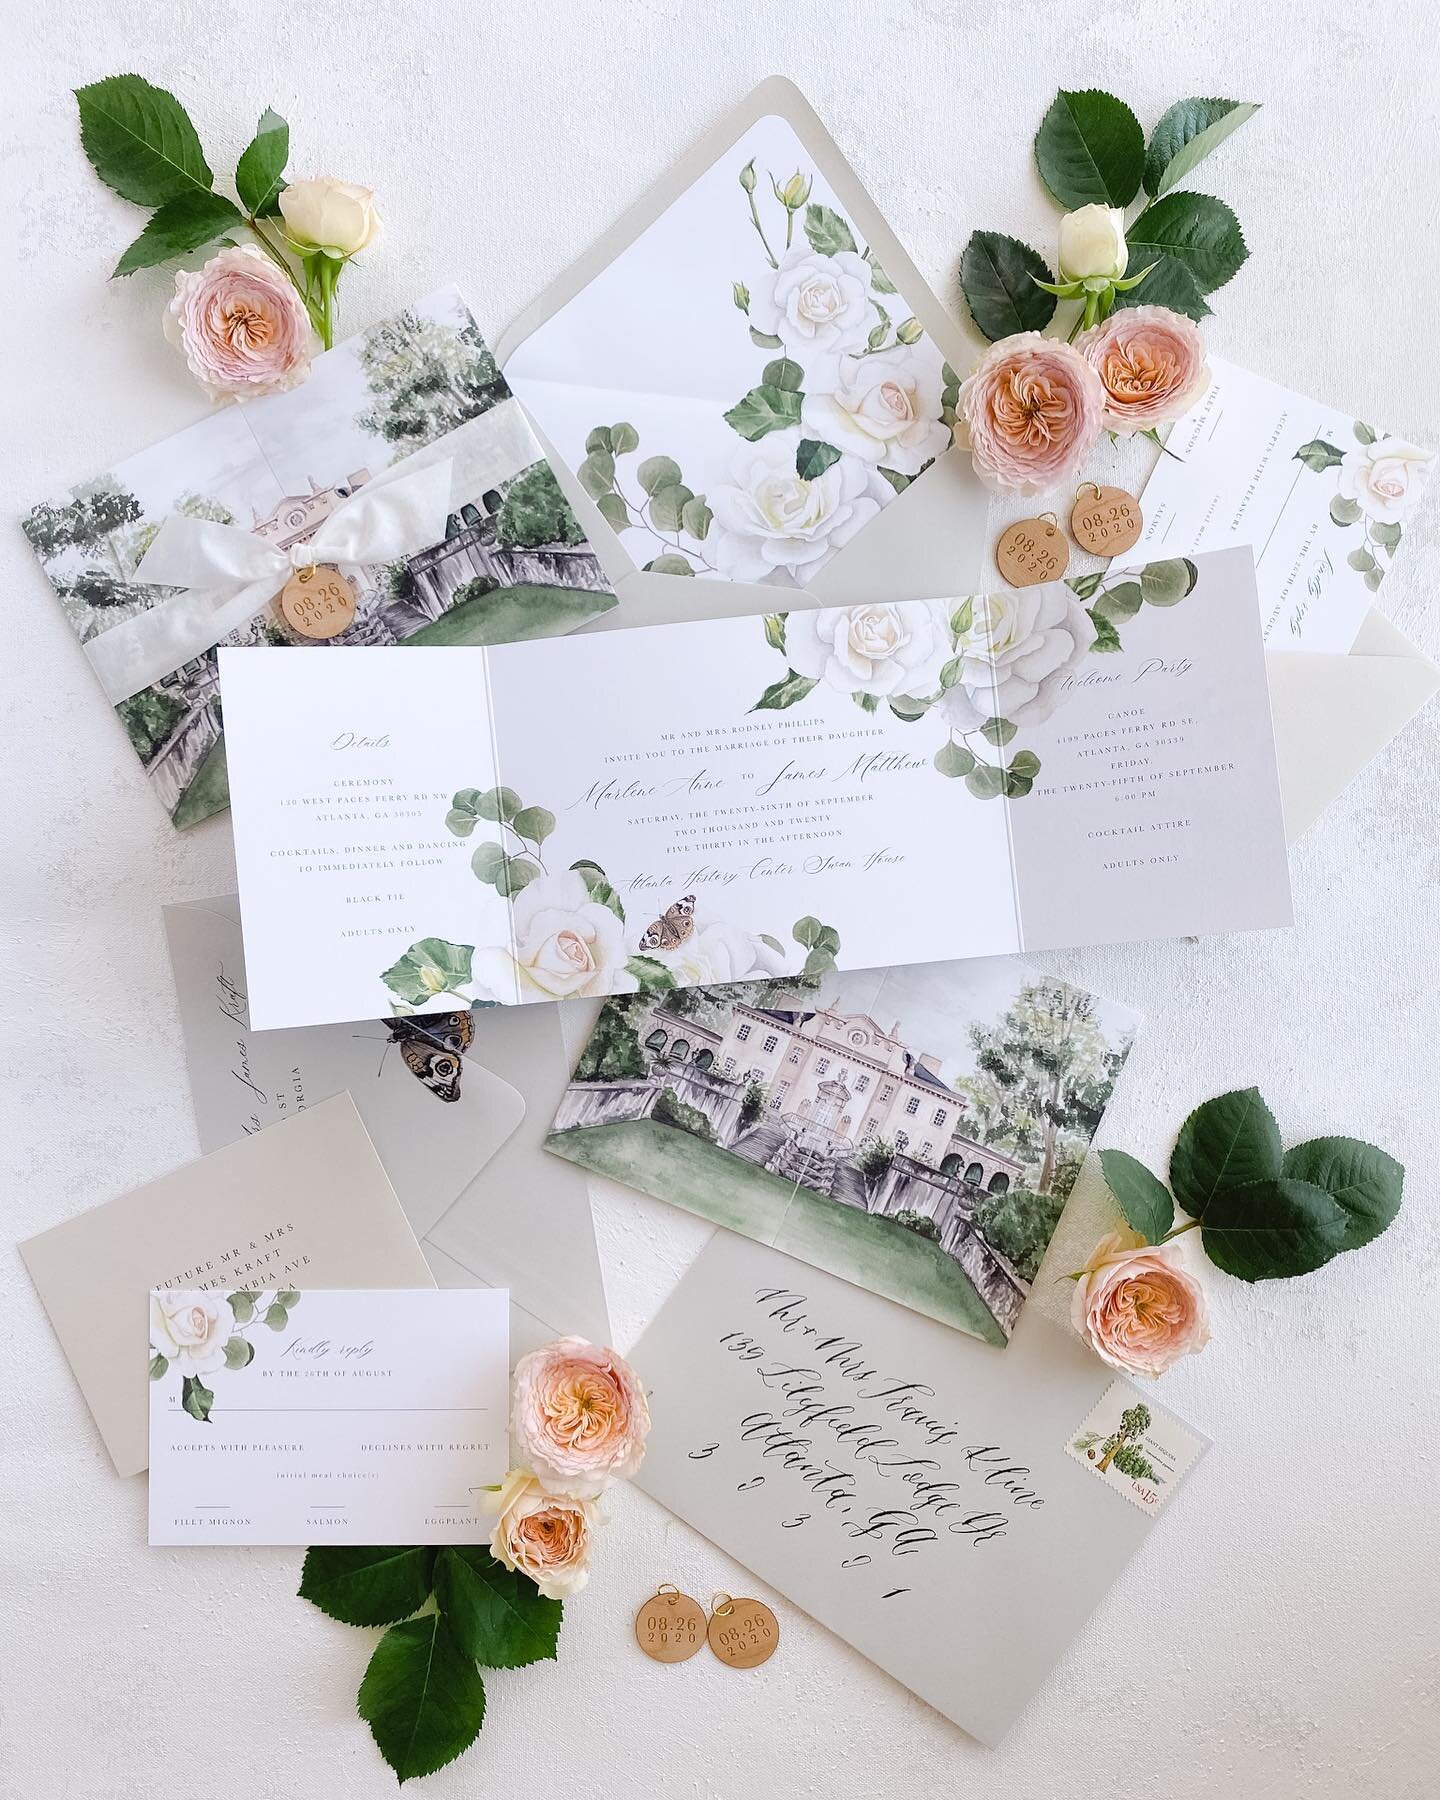 The perfect suite for a grand venue does not exi&hellip;.☺️✨the small real wood tag was just the perfect accessory to this @swancoachhouse invitation🤍🌿
Photo and styling: @inquisited ✨
#paperbetty #paperbettyinvitations #customweddinginvitations #c